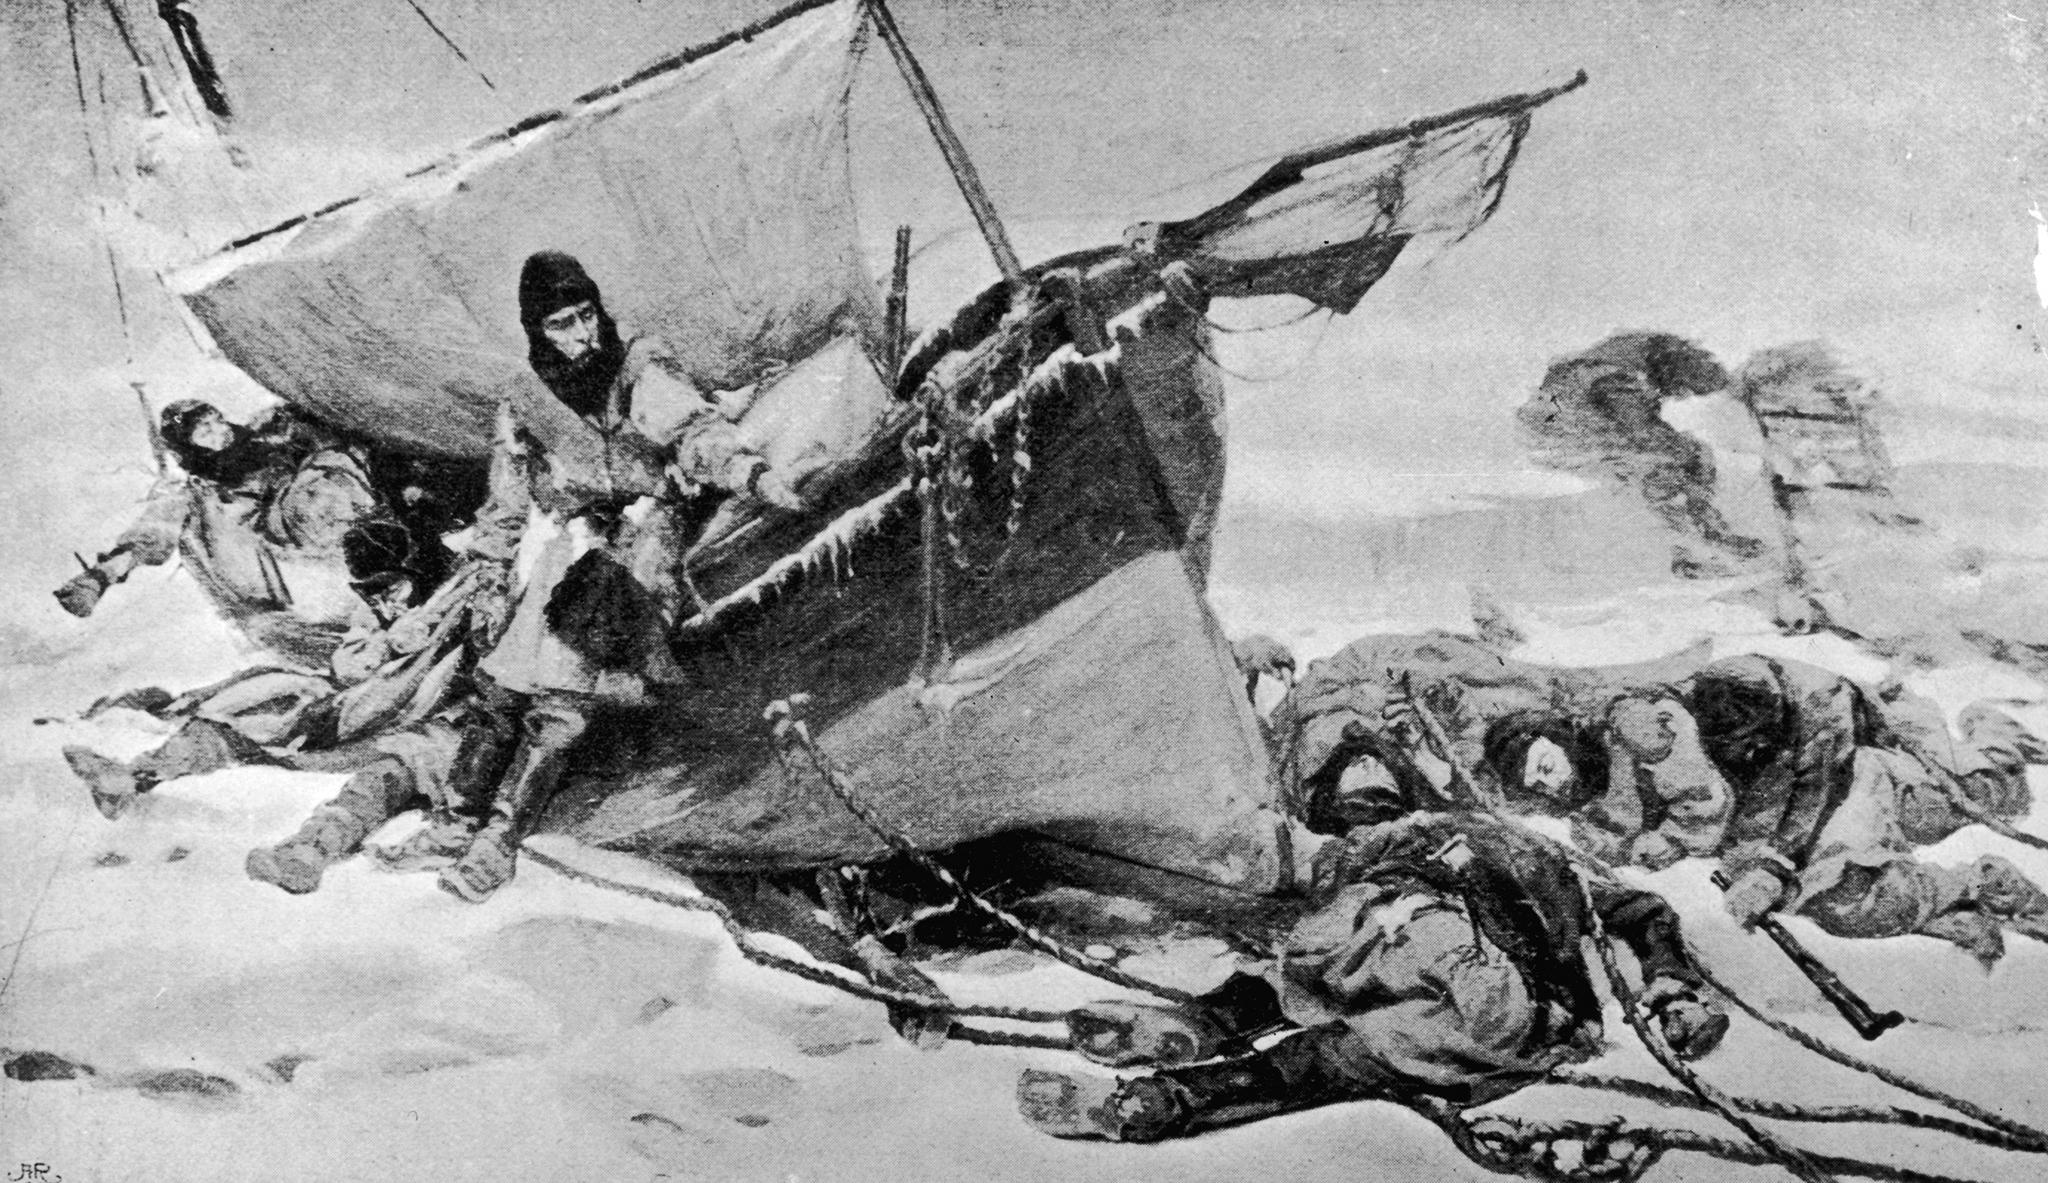 Members of the arctic expedition led by British explorer Sir John Franklin (1786 - 1847) on their attempt to discover the Northwest passage. The expedition was beleaguered by thick ice and Franklin died in June 1847 and most of the team died of starvation